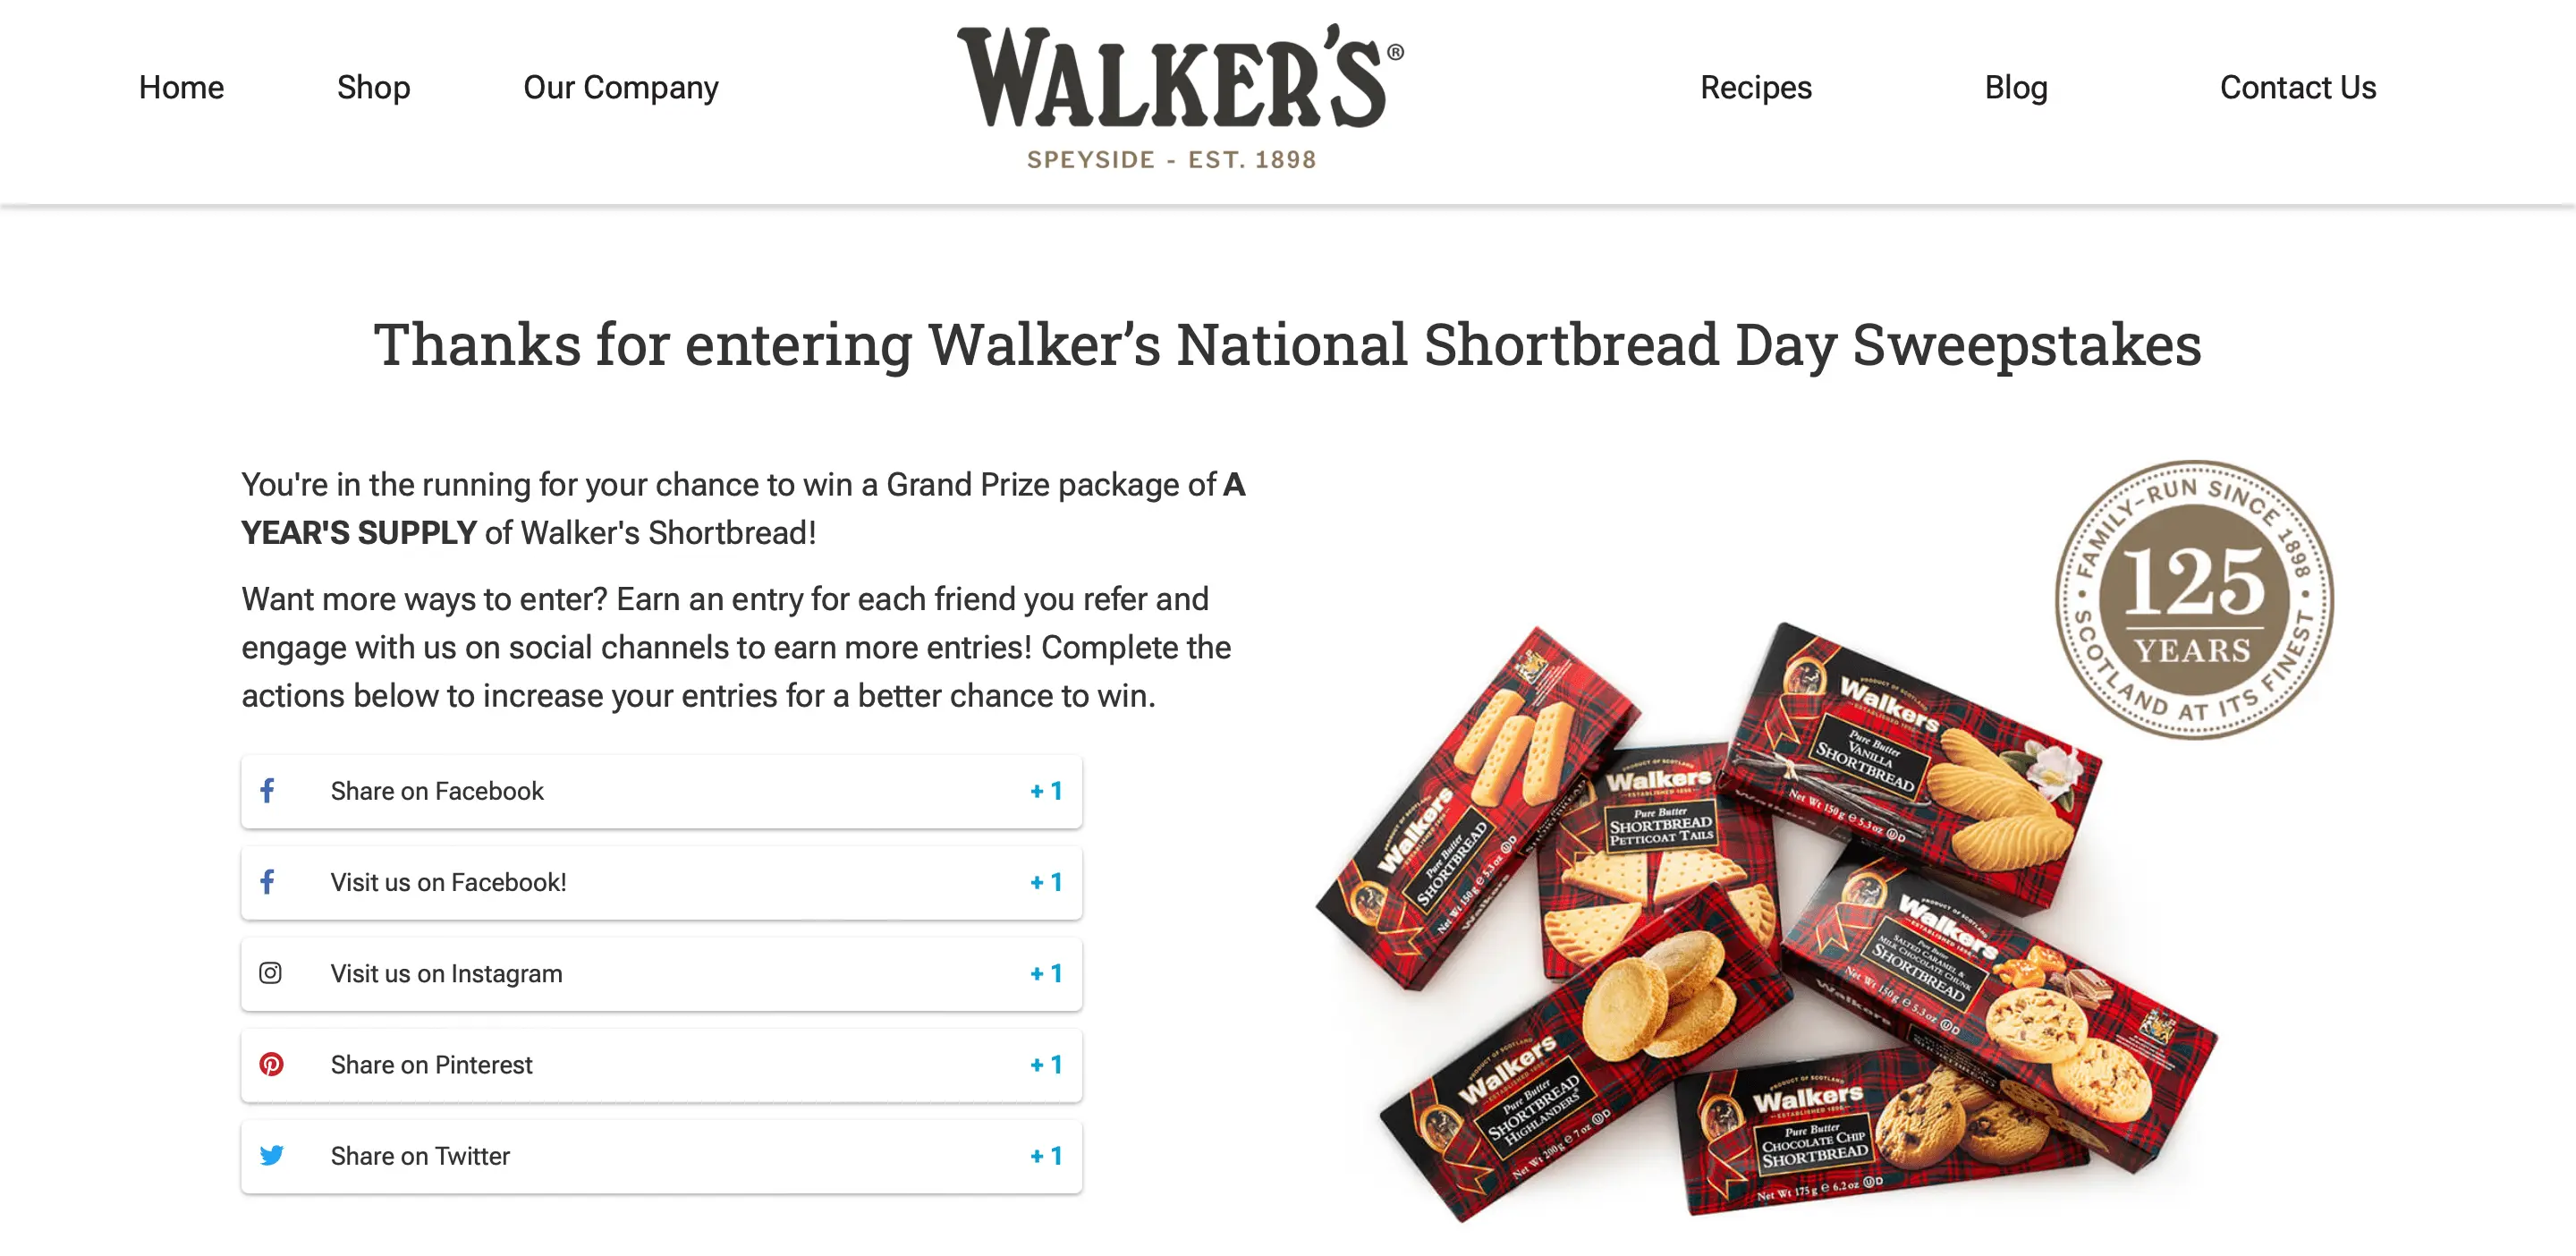 Walkers shortbread contest sharing page!